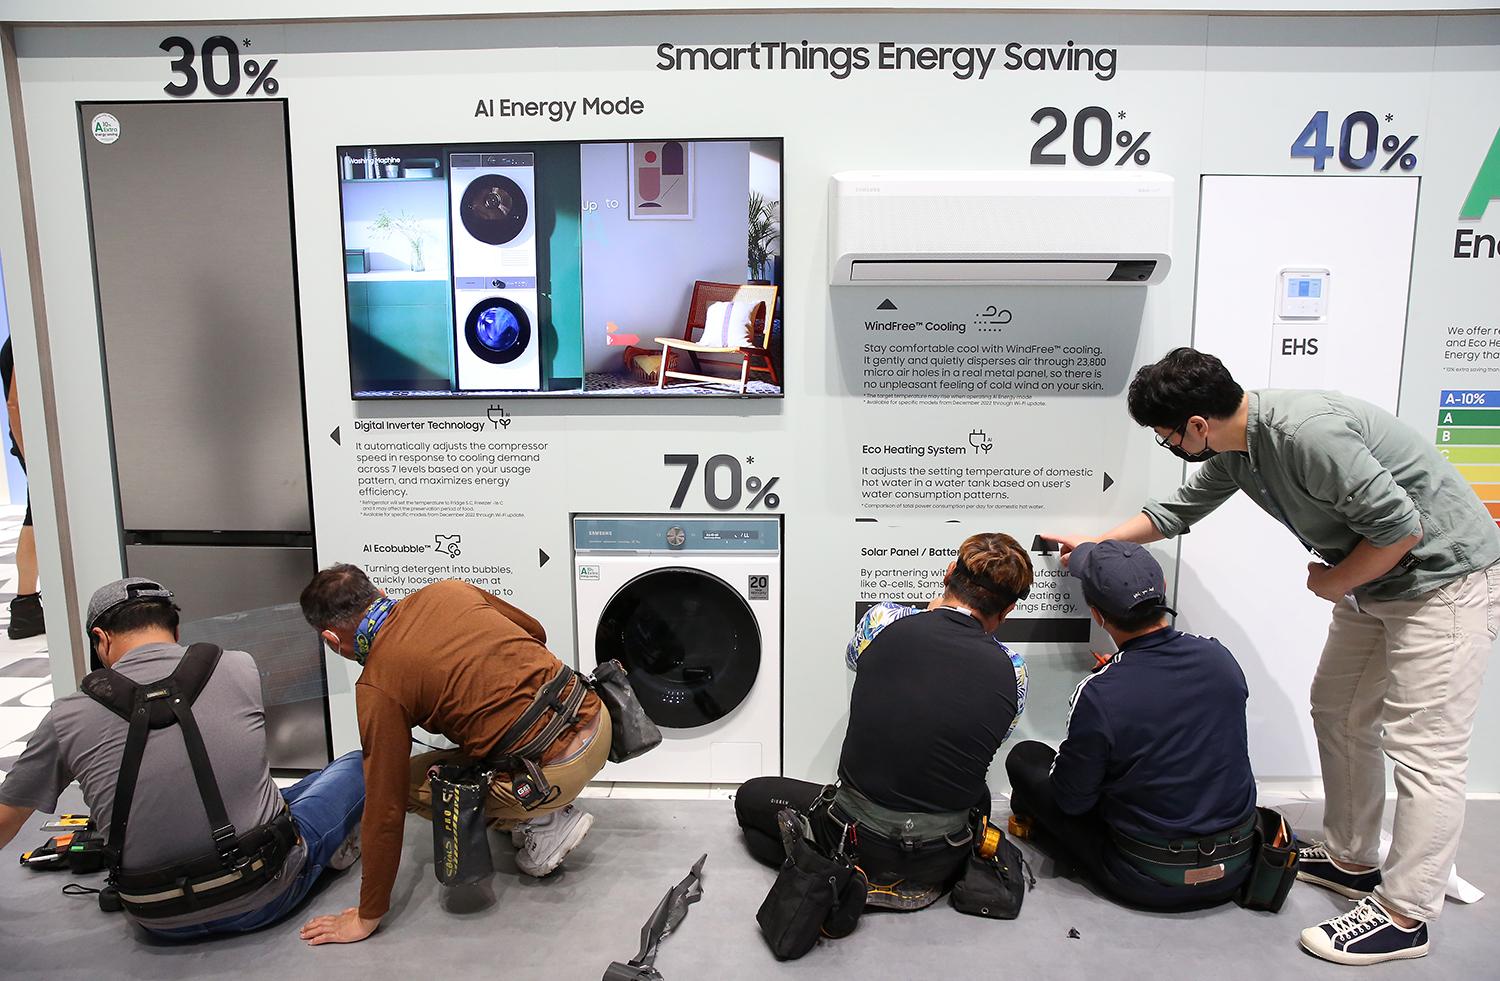 Workers install smart kitchen appliances at a consumer electronics trade show.